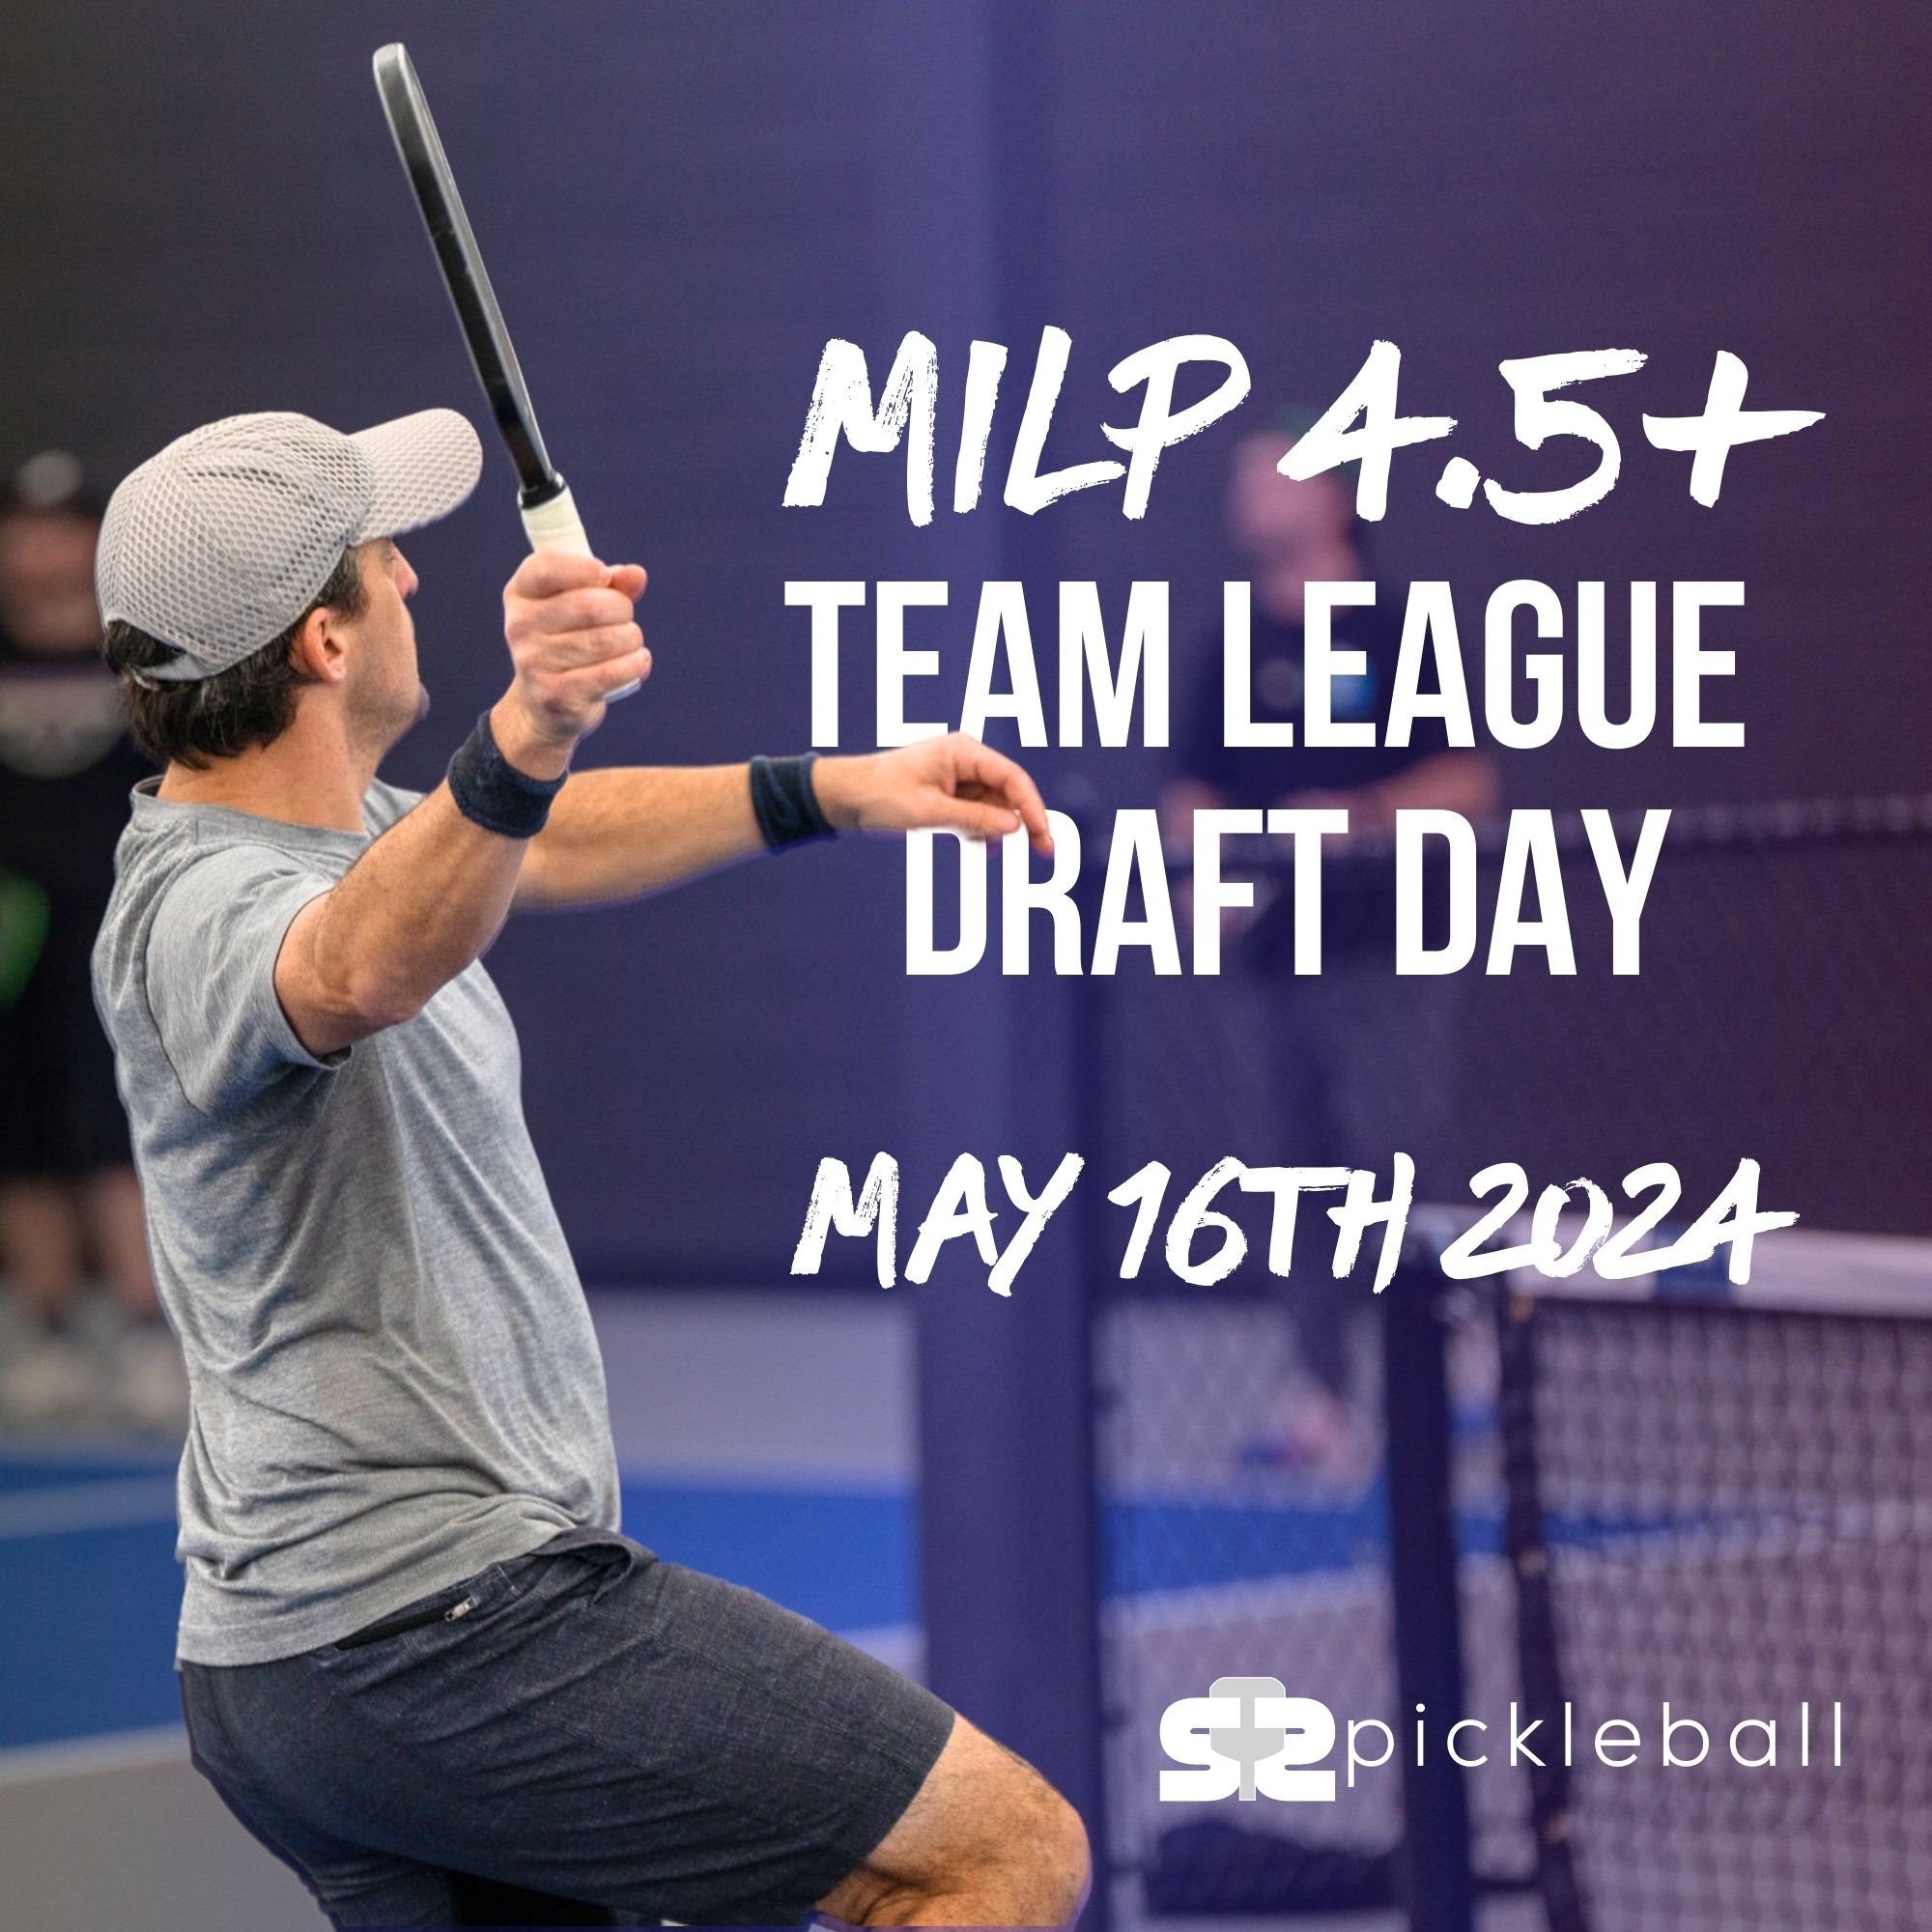 5/16 MiLP DRAFT DAY! (Are you as excited as we are?!?)
.
Minor League Pickleball is coming to Boise! Come try out for a spot on one of six teams for the 4.5+ division. On draft tryout day, team captains will be reviewing player style and technique. P